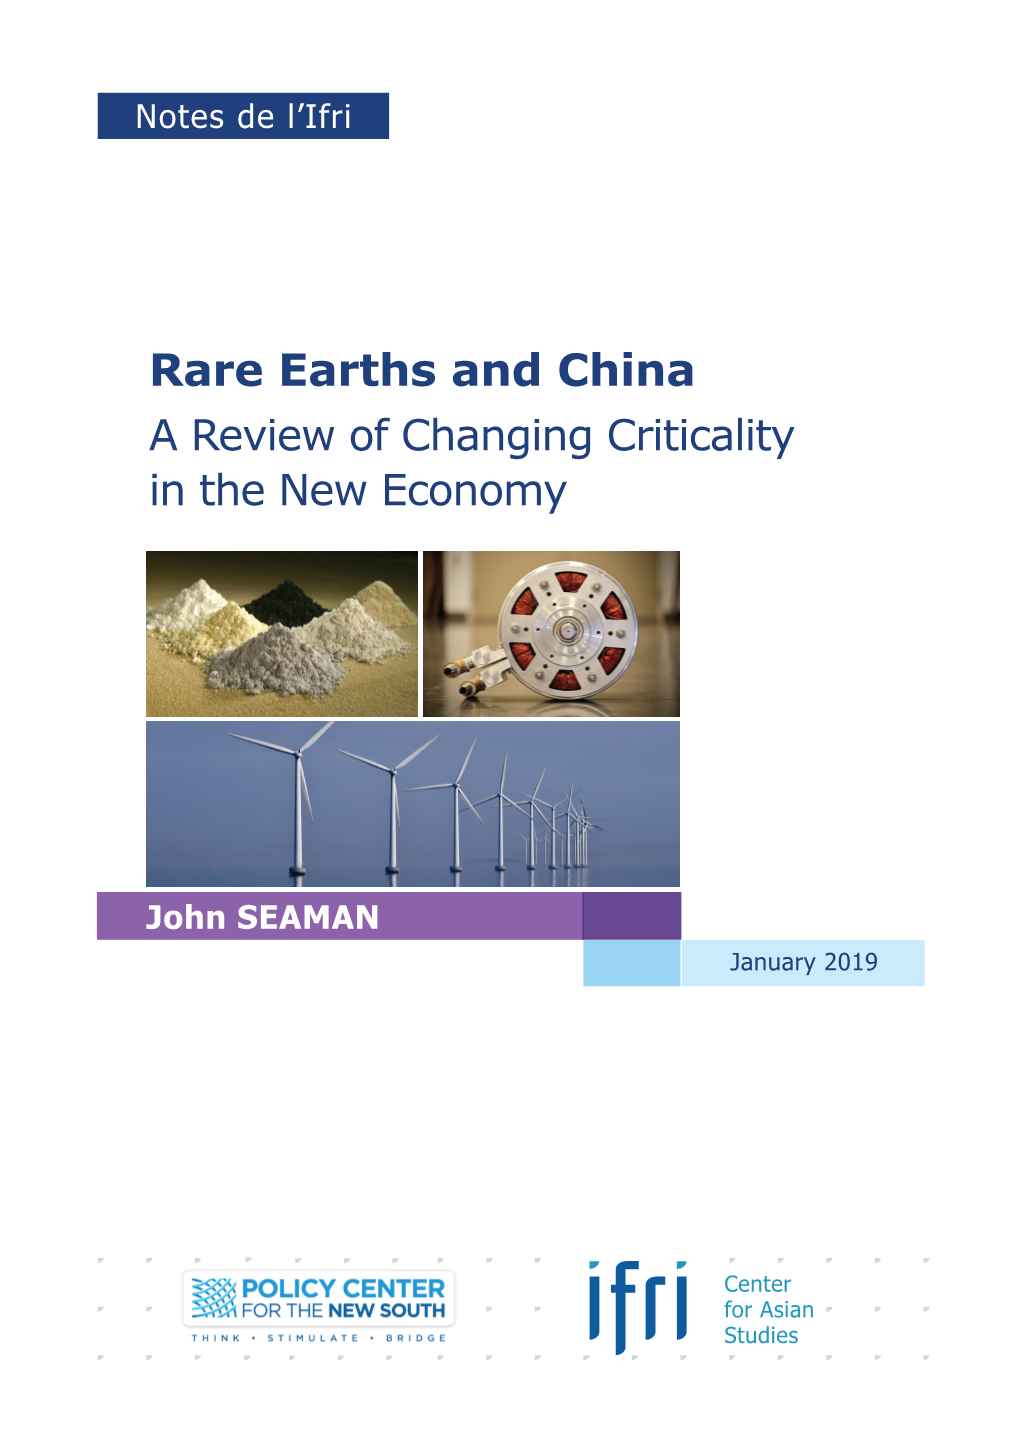 Rare Earths and China a Review of Changing Criticality in the New Economy